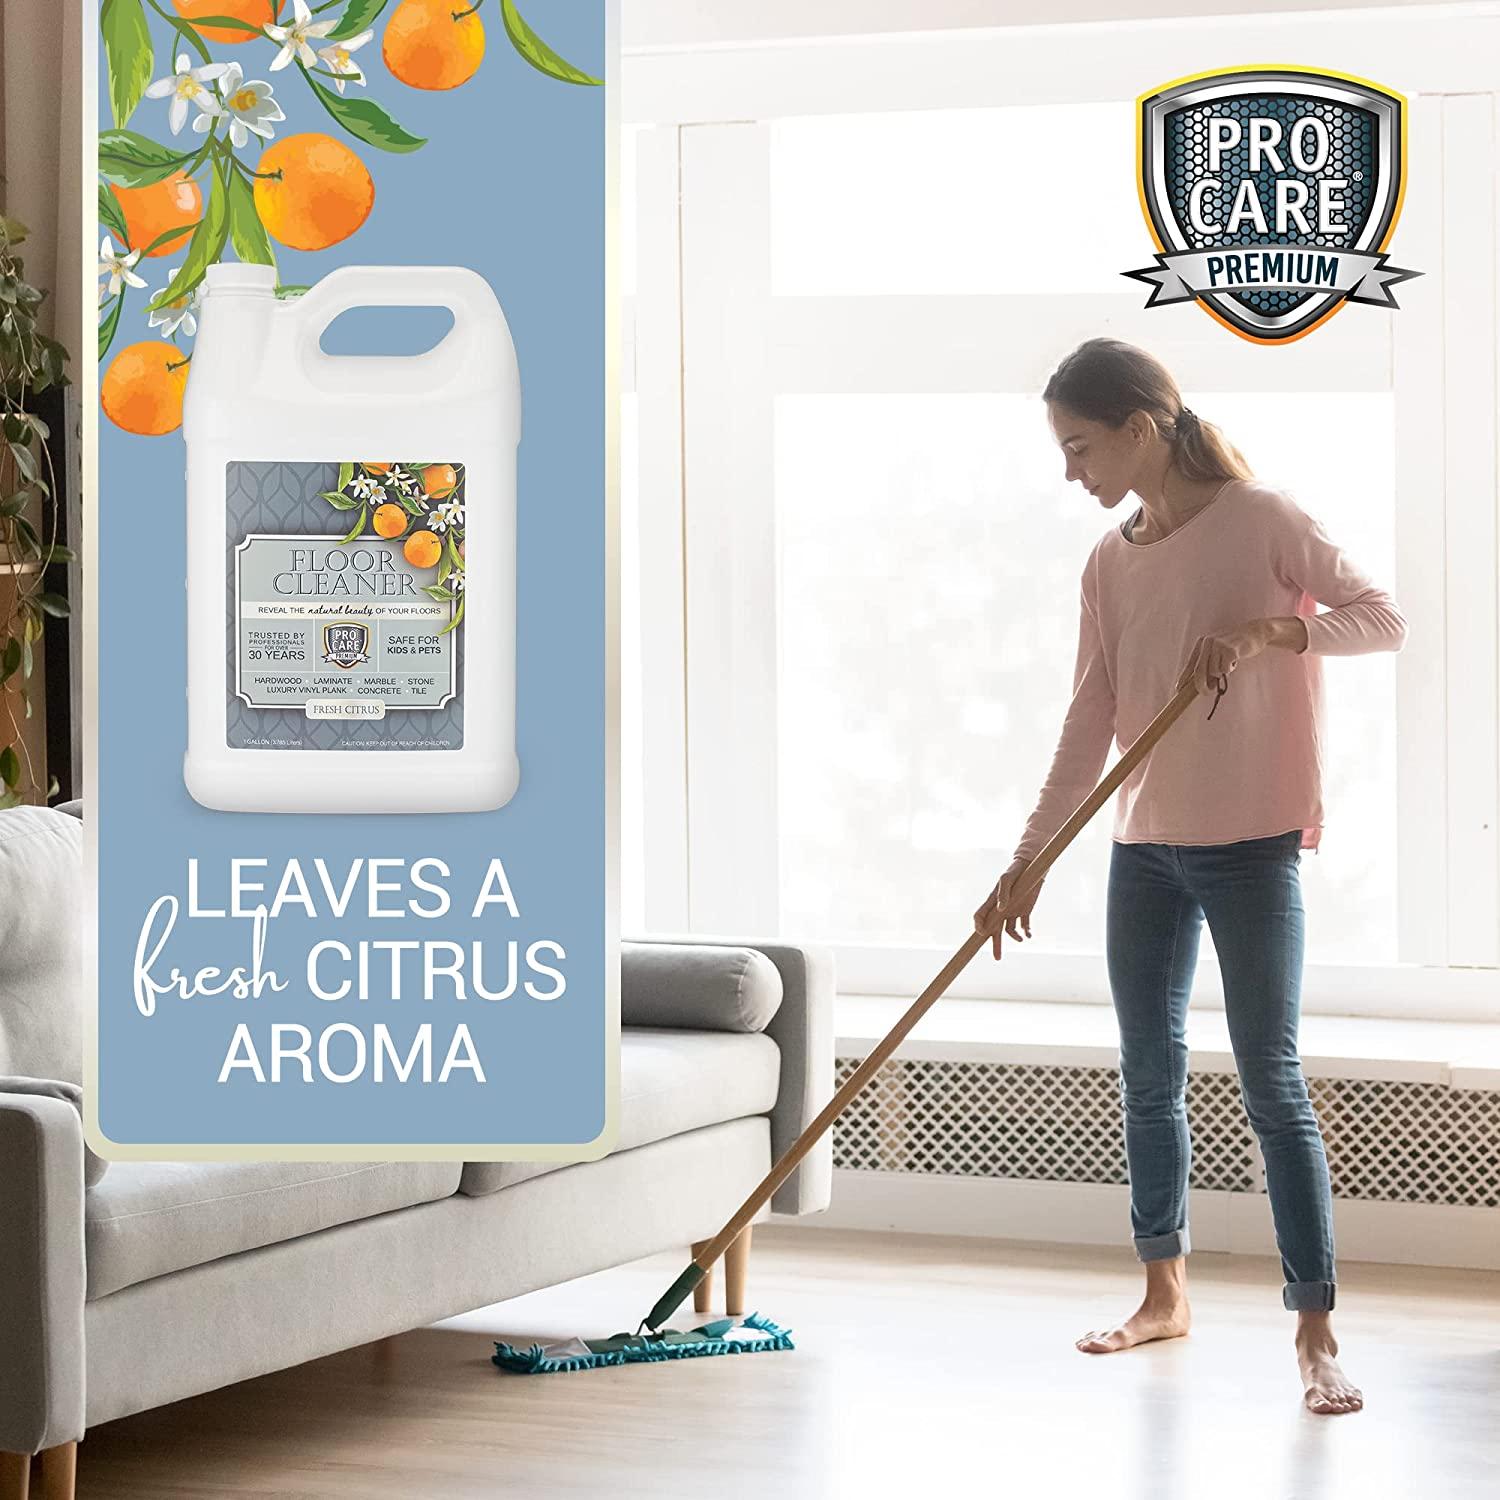 ProCare Citrus Floor Cleaner Made in USA   Tile, Stone, Laminate